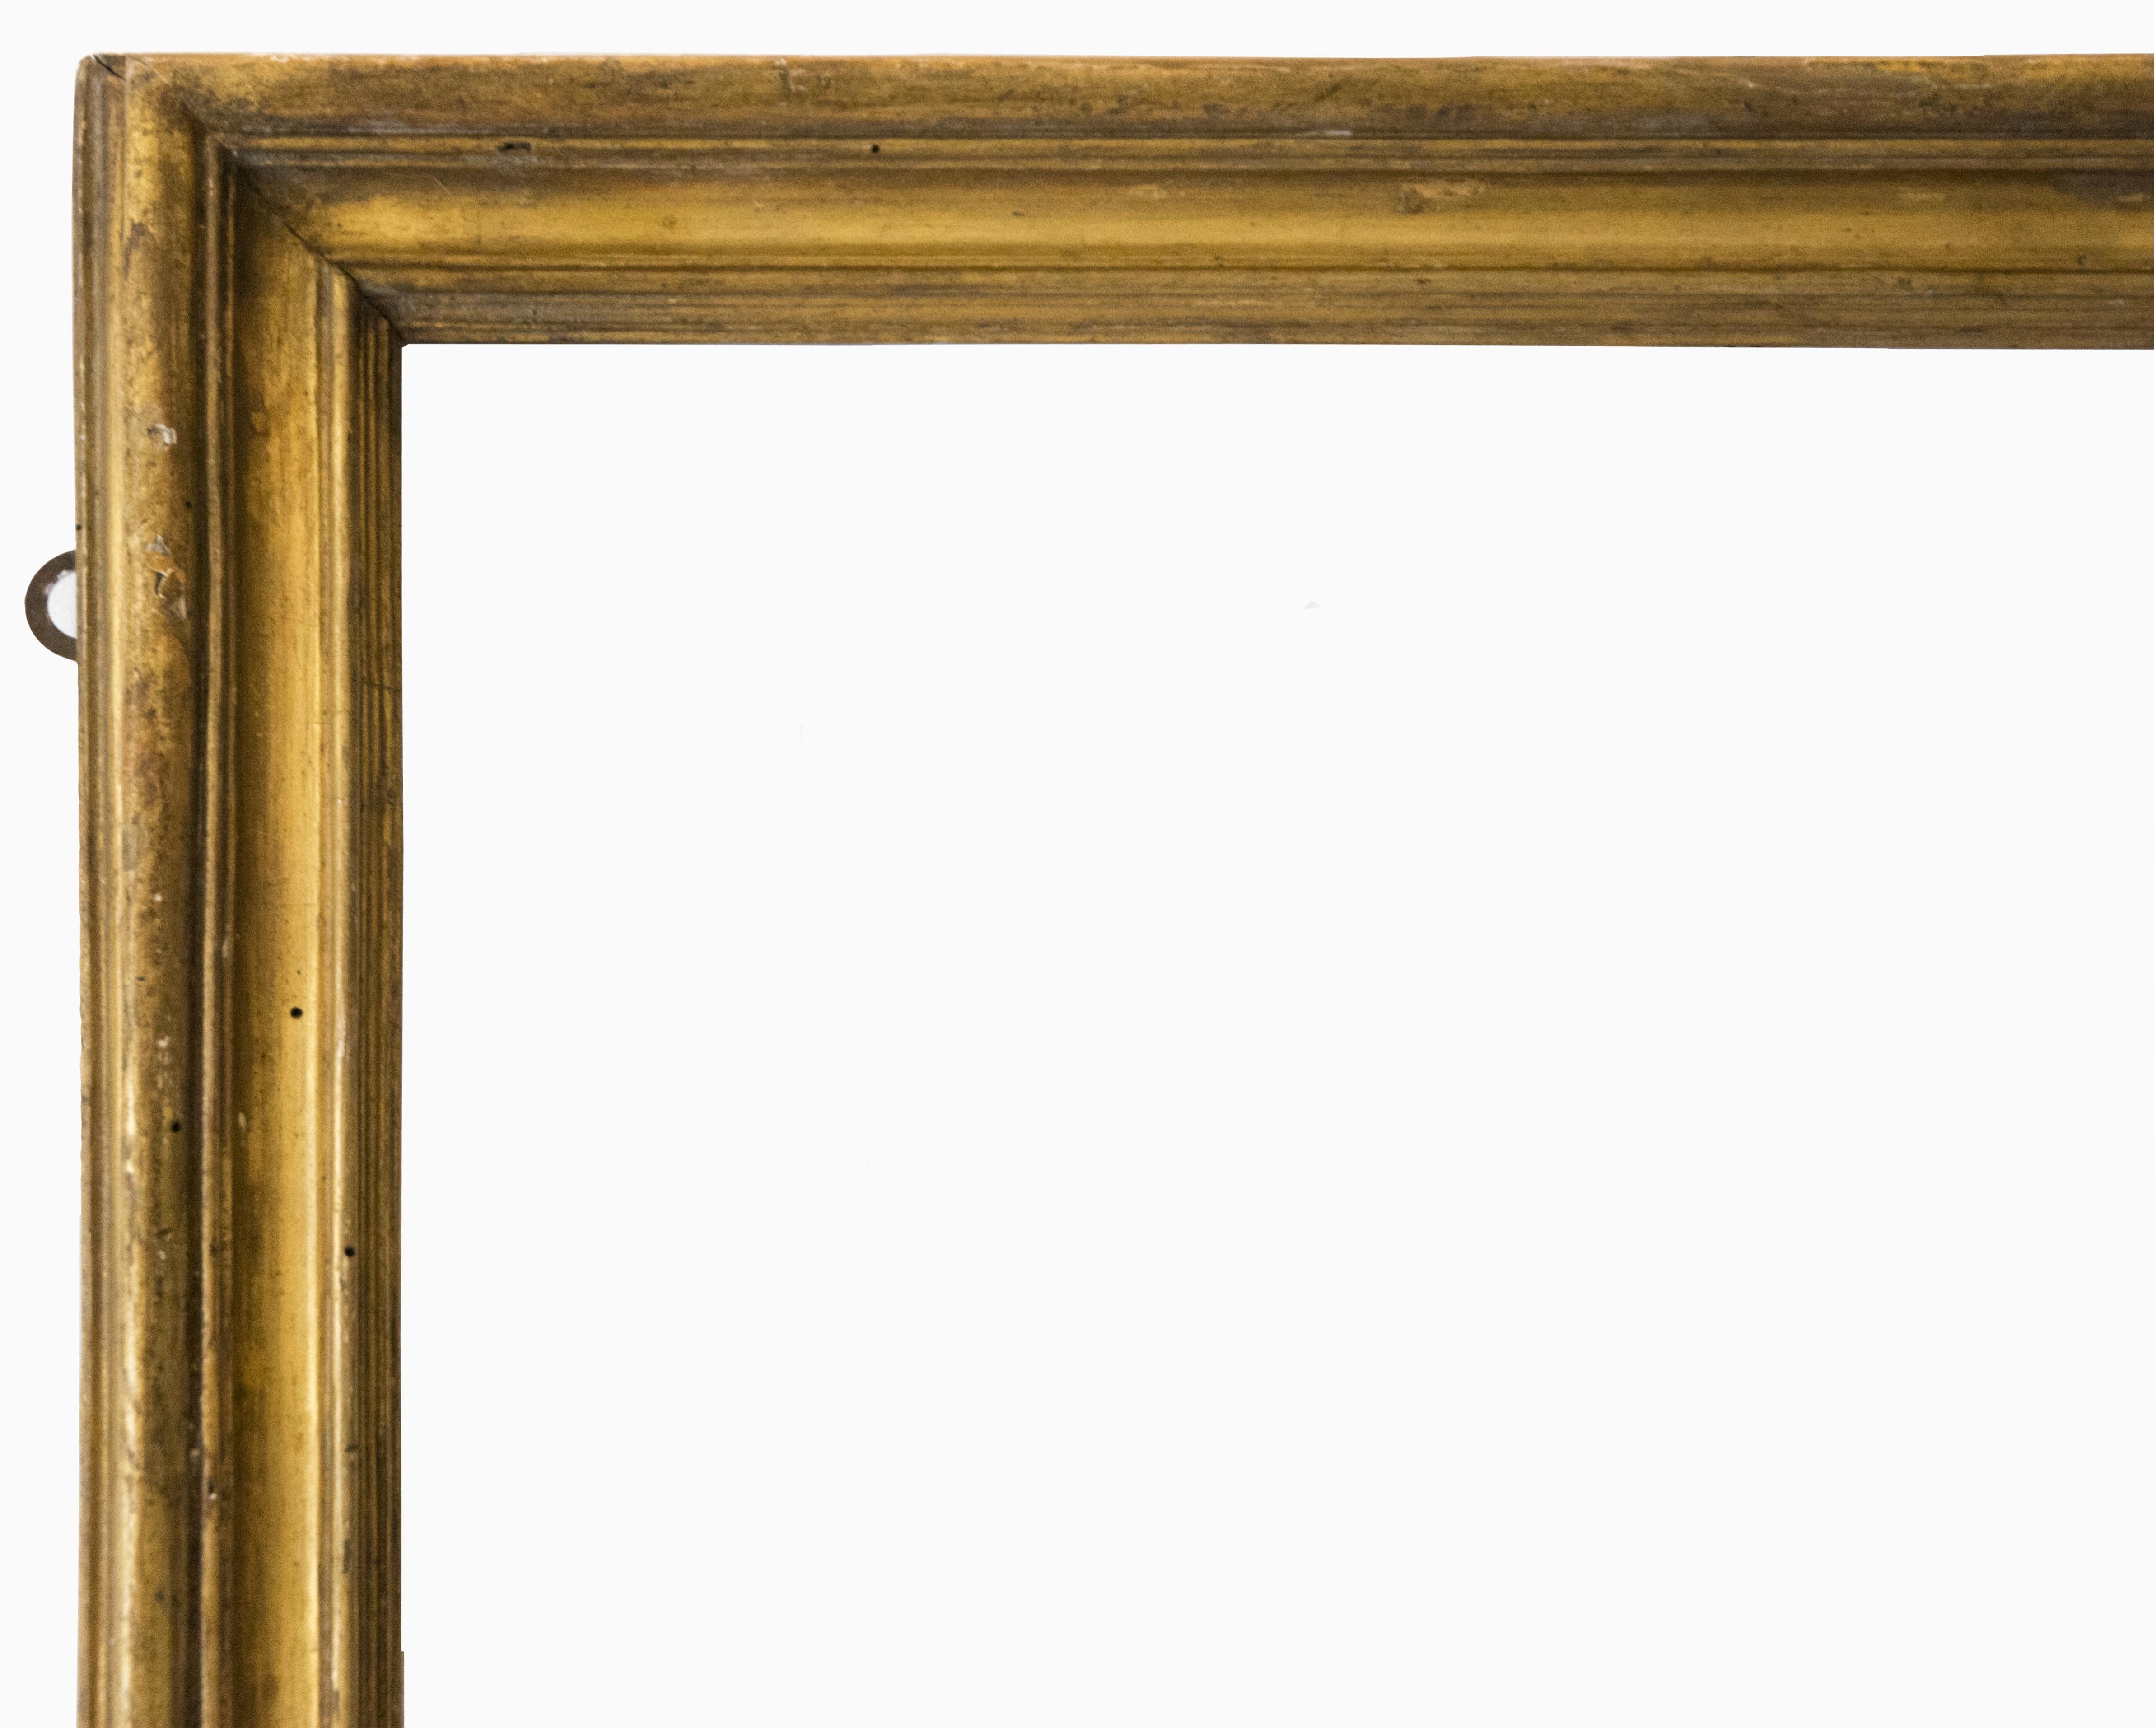 Central Italy frame, early 18th century
Golden wooden Salvator Rosa frame. Mixtilinear profile.
Inside: 115.2 x 64.7 cm; outside: 125.5 x 75.5 cm.
Depth is the wide of the band.
 